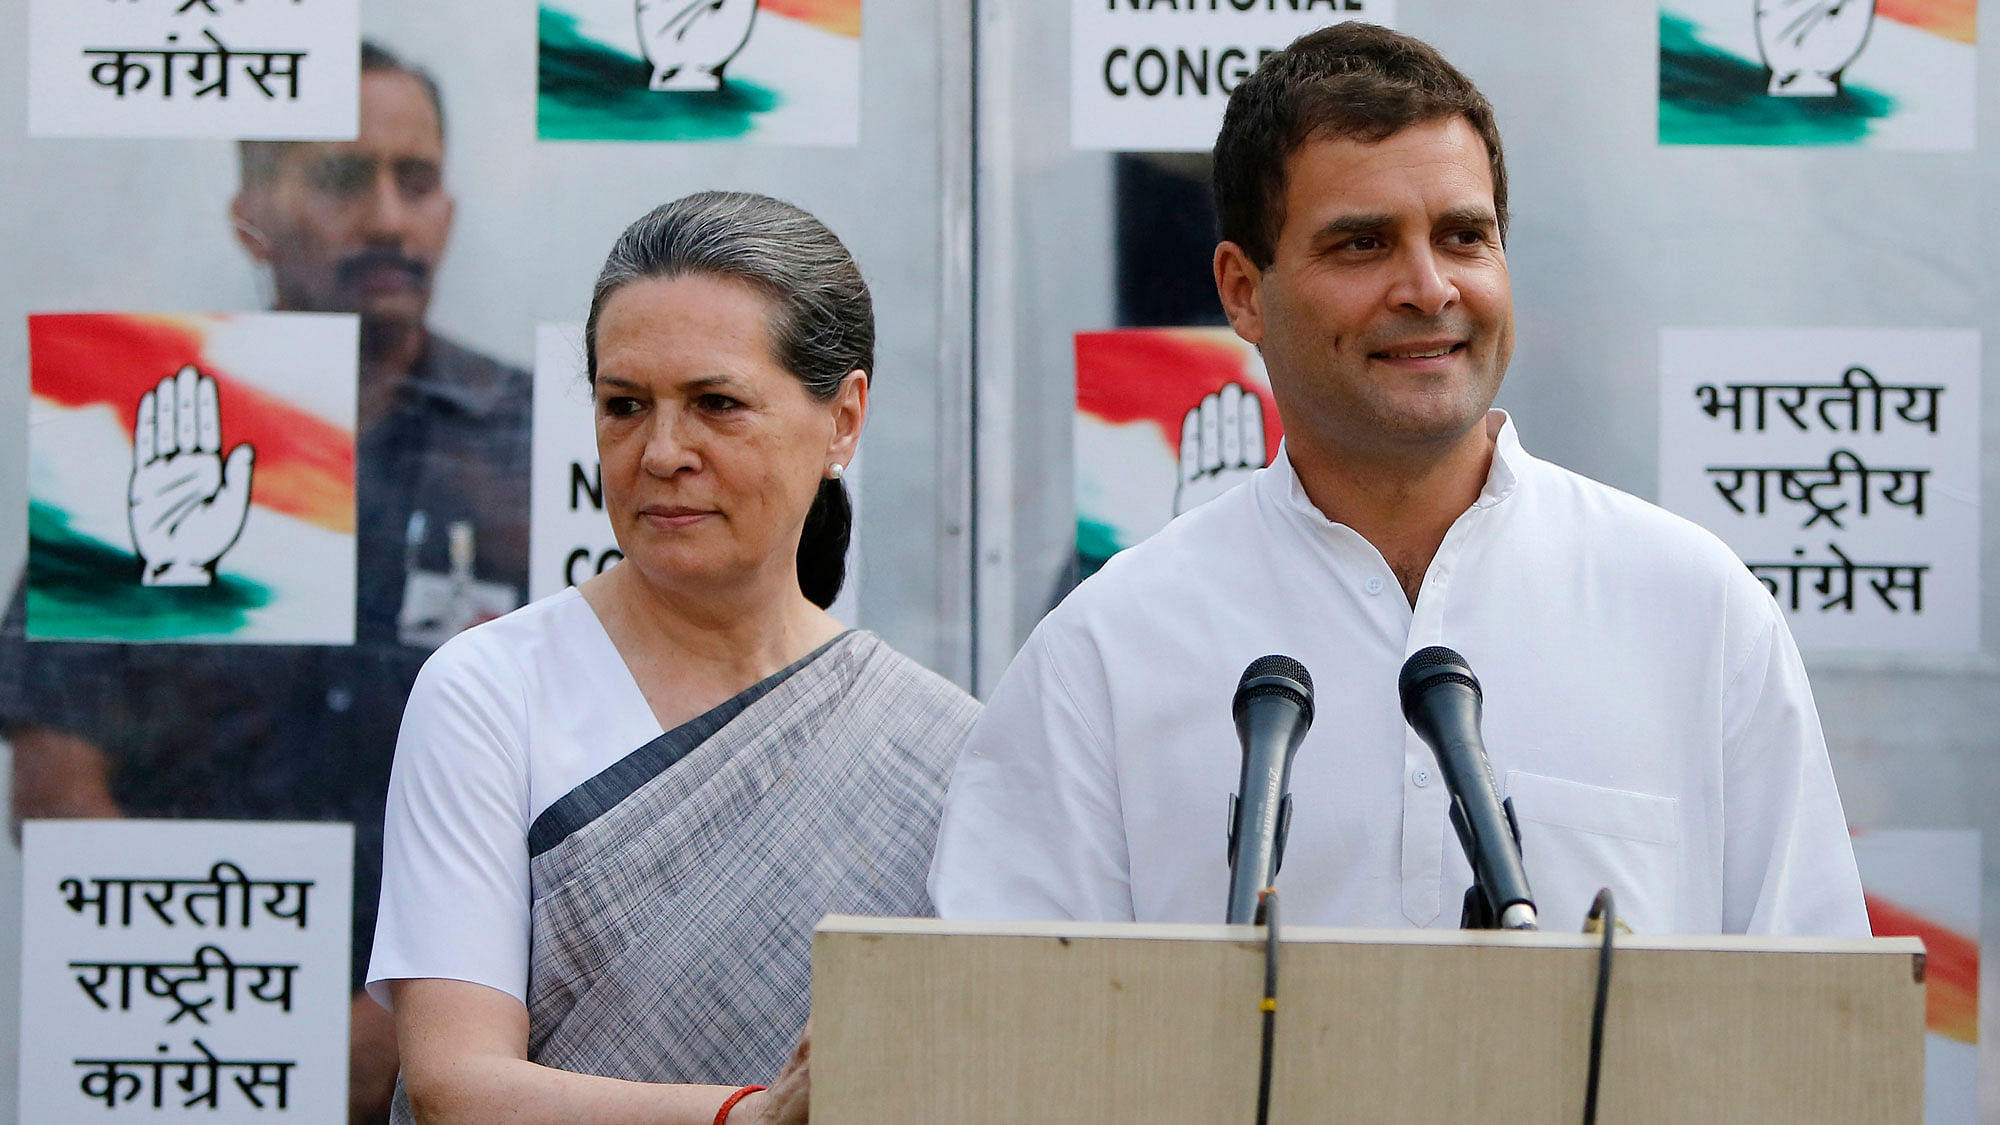  Congress Vice President Rahul Gandhi speaking to the media as his mother and Congress chief Sonia Gandhi (L) stands next to him during a press conference in New Delhi. (Photo: Reuters)